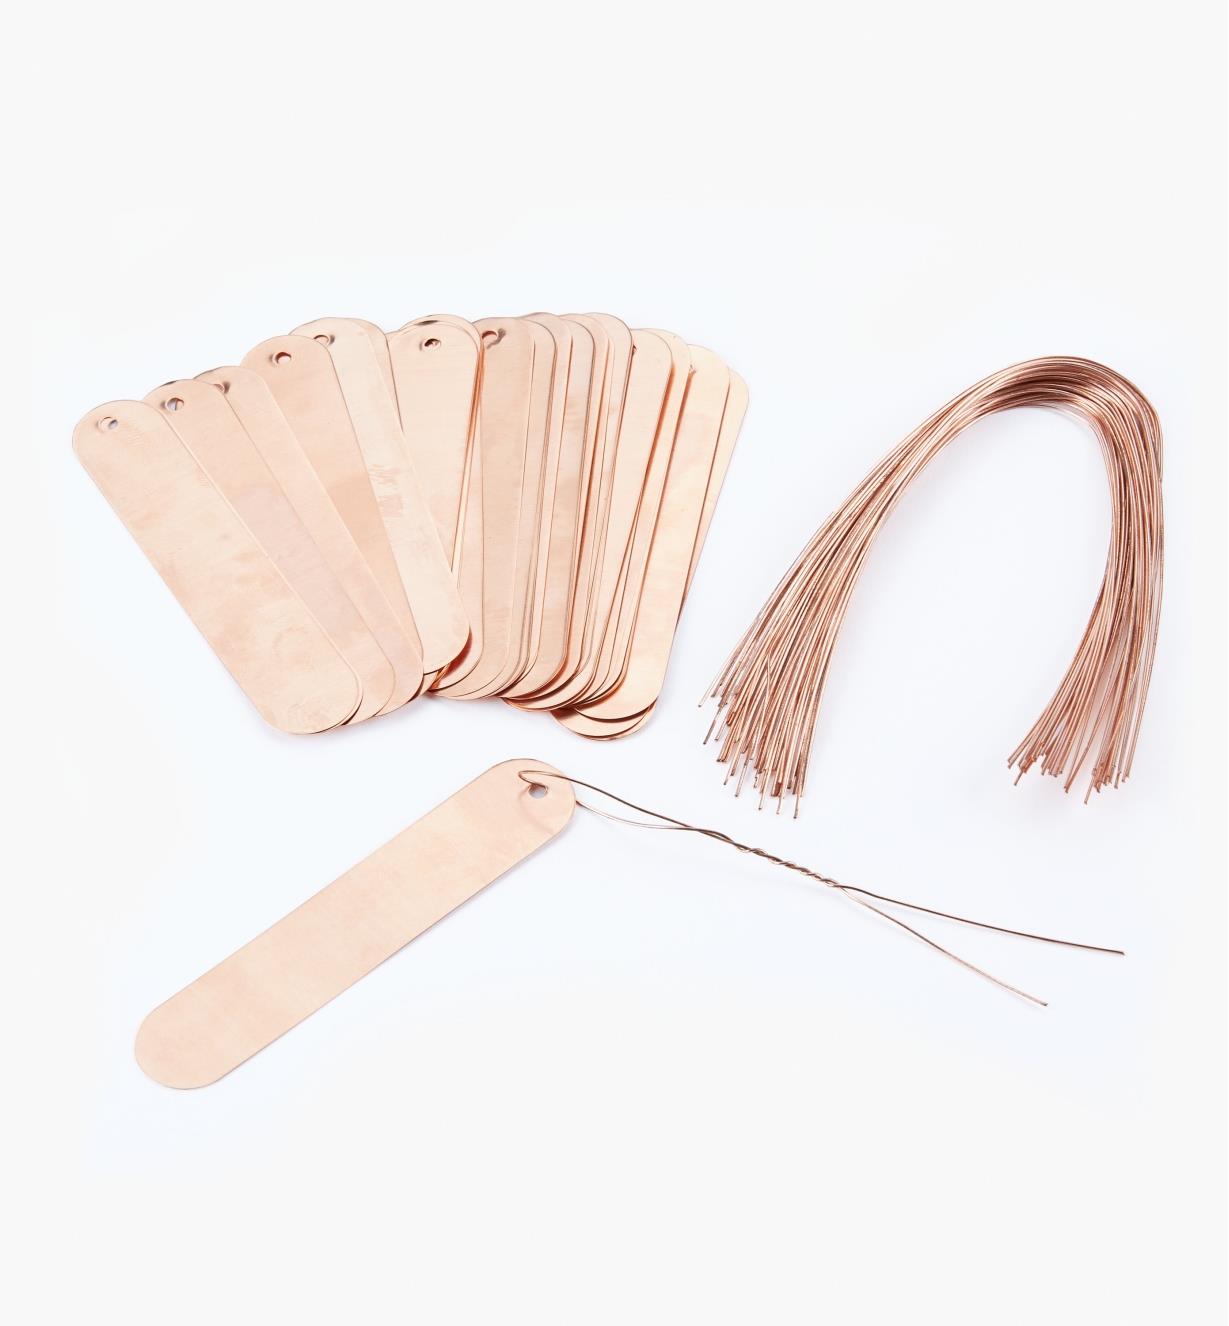 Details about   100 ~ Copper Plant Tags W/Eyelet & Copper Tie 3 3/4 x 3/4 Thickness .005" 